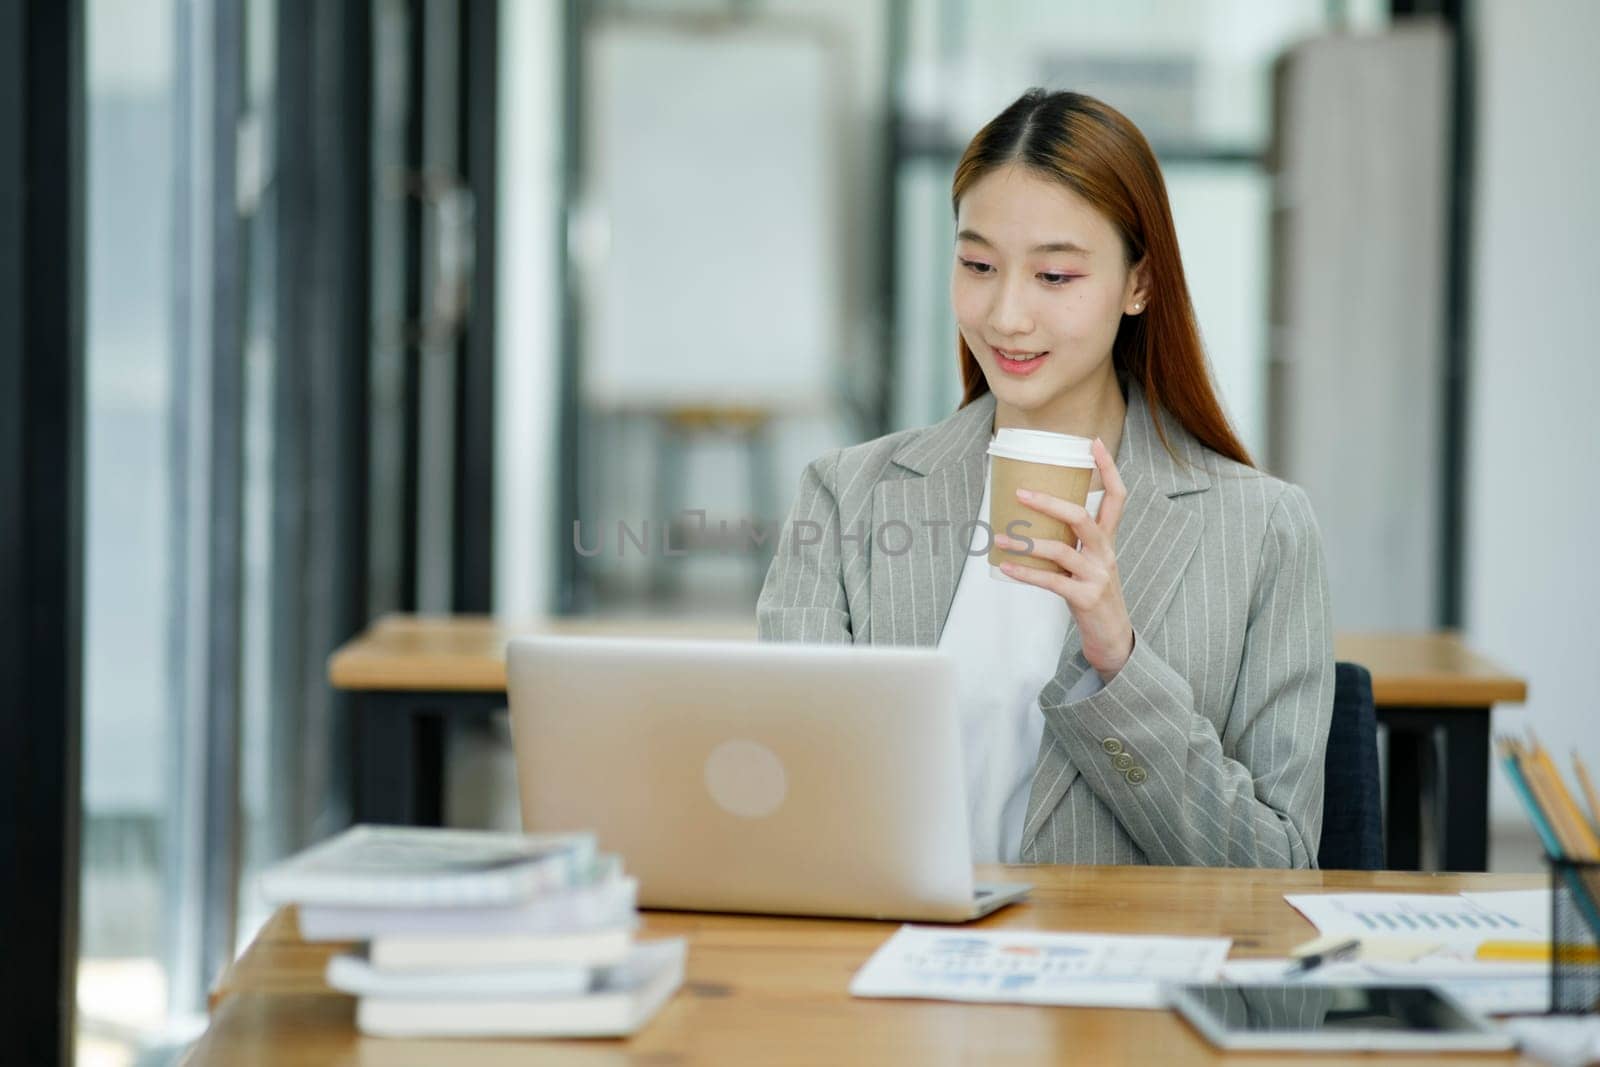 Woman sitting at work on a casual day with coffee.